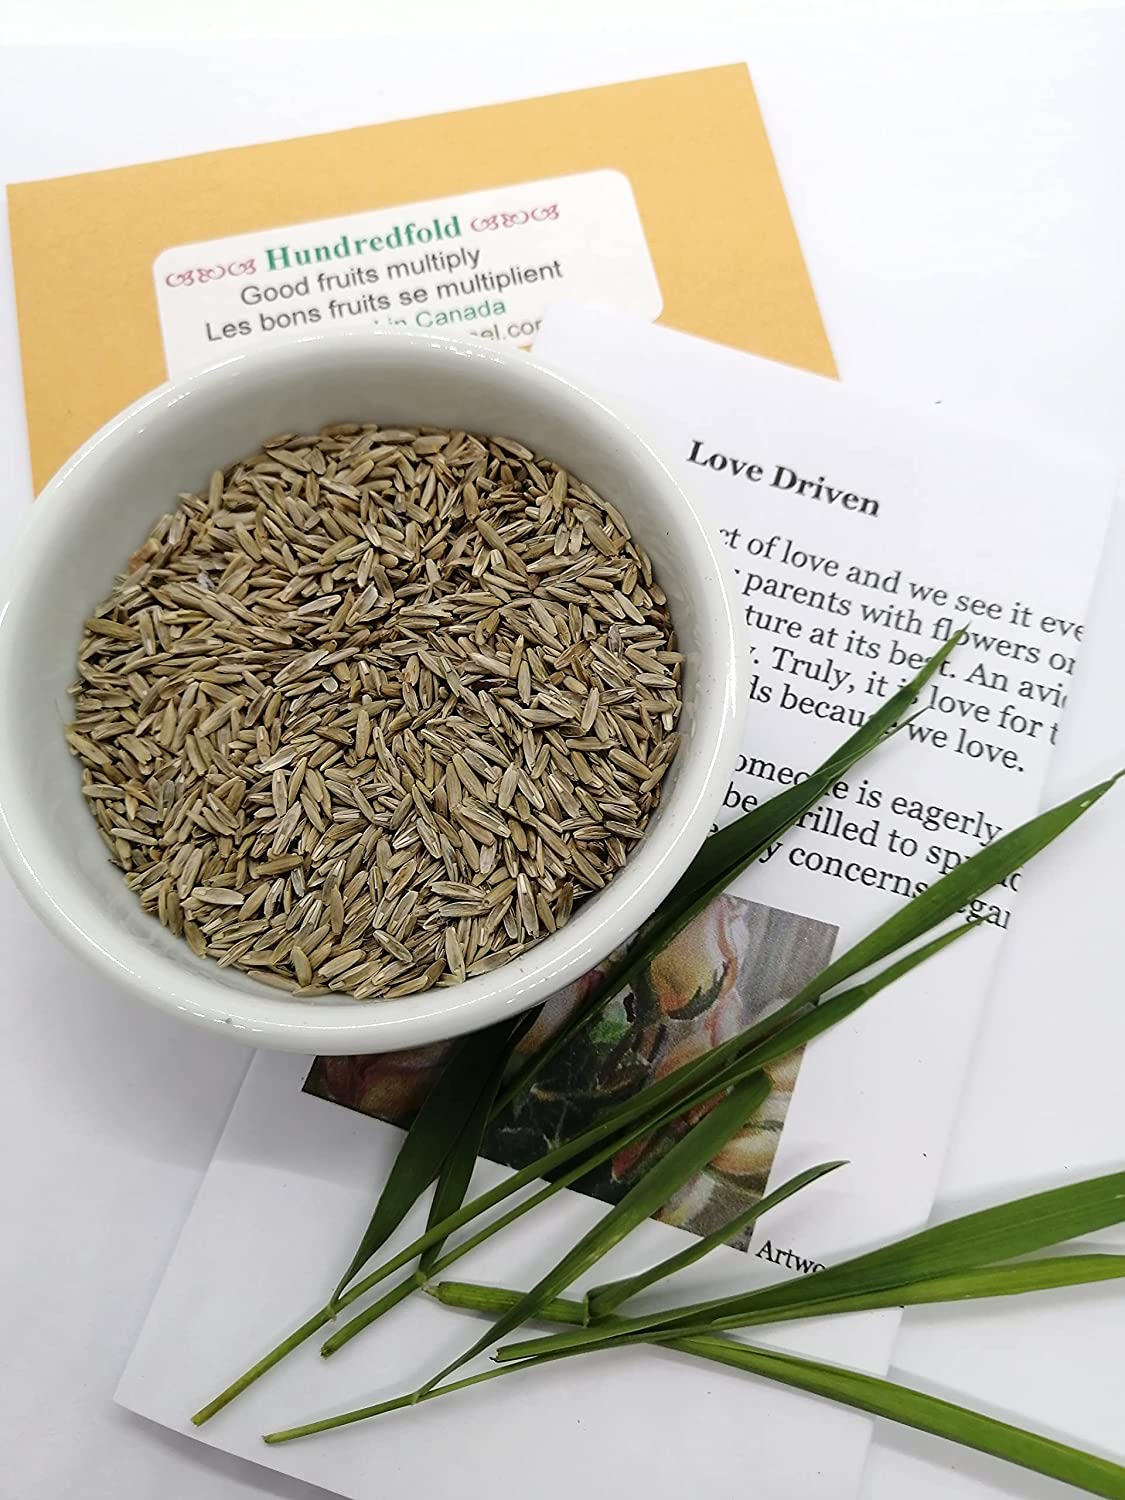 Hundredfold 4lbs Organic Annual Ryegrass Seeds - Festuca perennis Non-GMO, Low-Growing Cover Crop, Soil Enrichment and Weed Suppression, Packed and Shipped in Canada